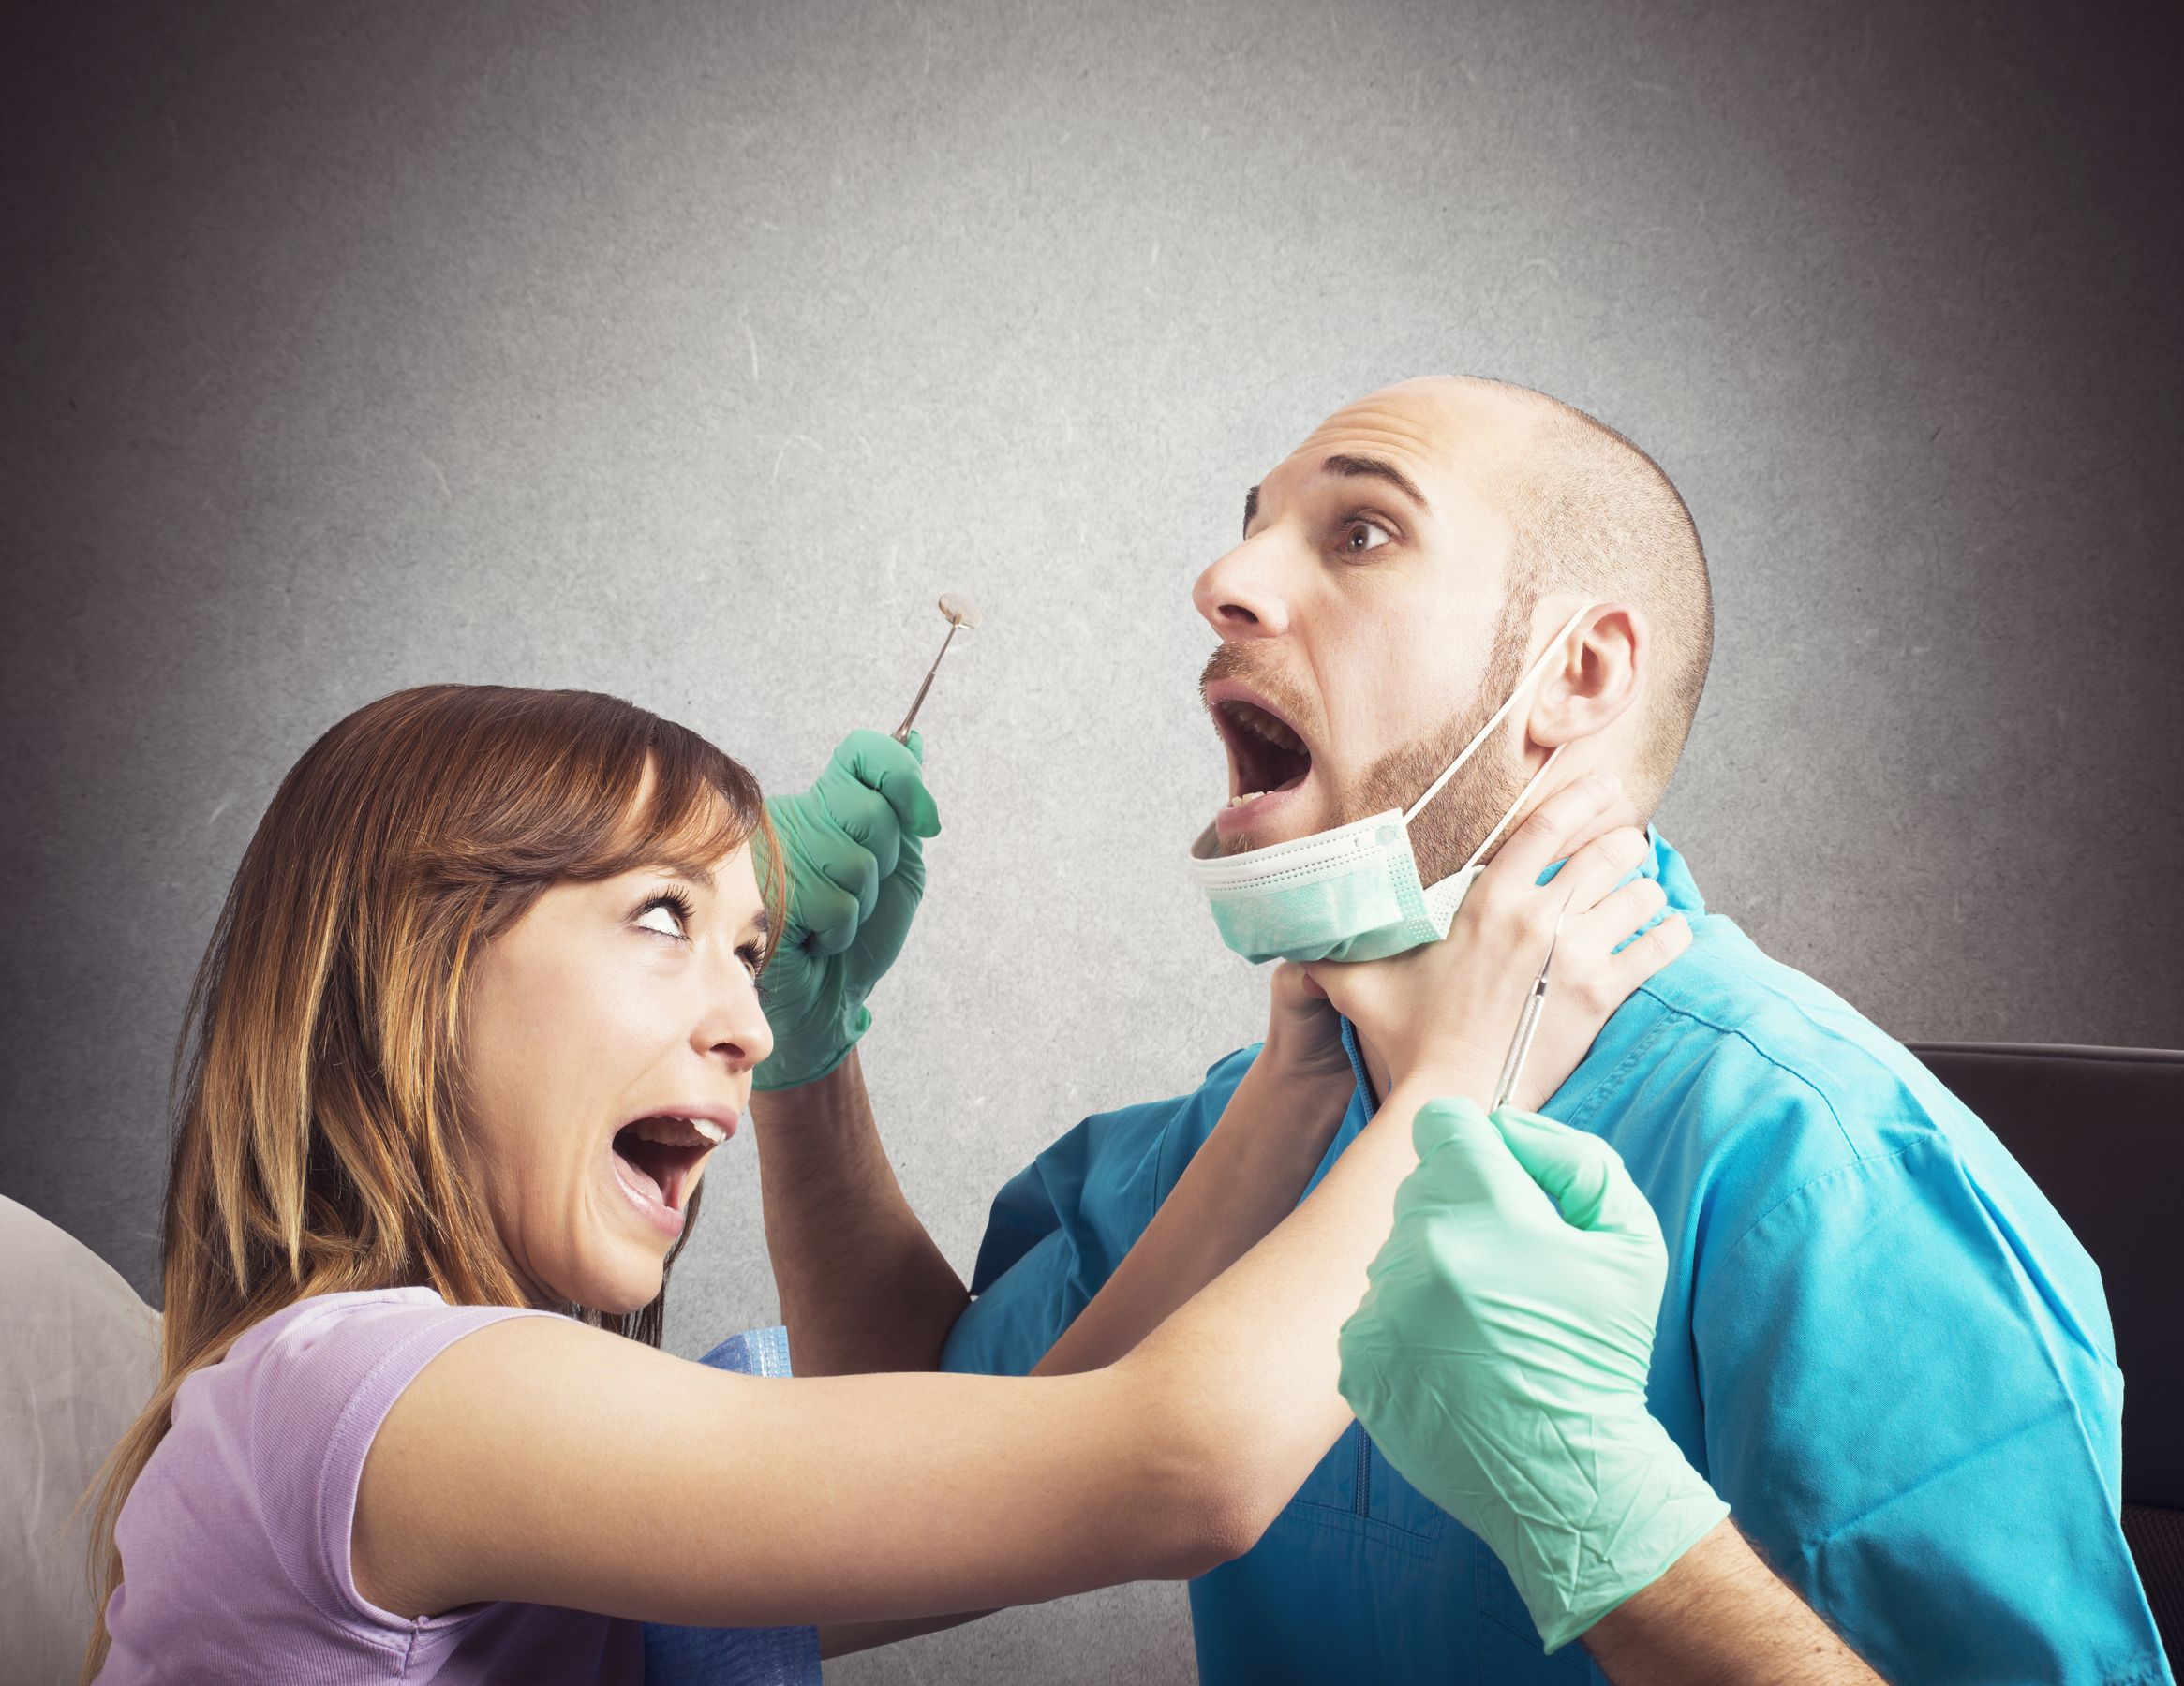 workplace violence in healthcare settings